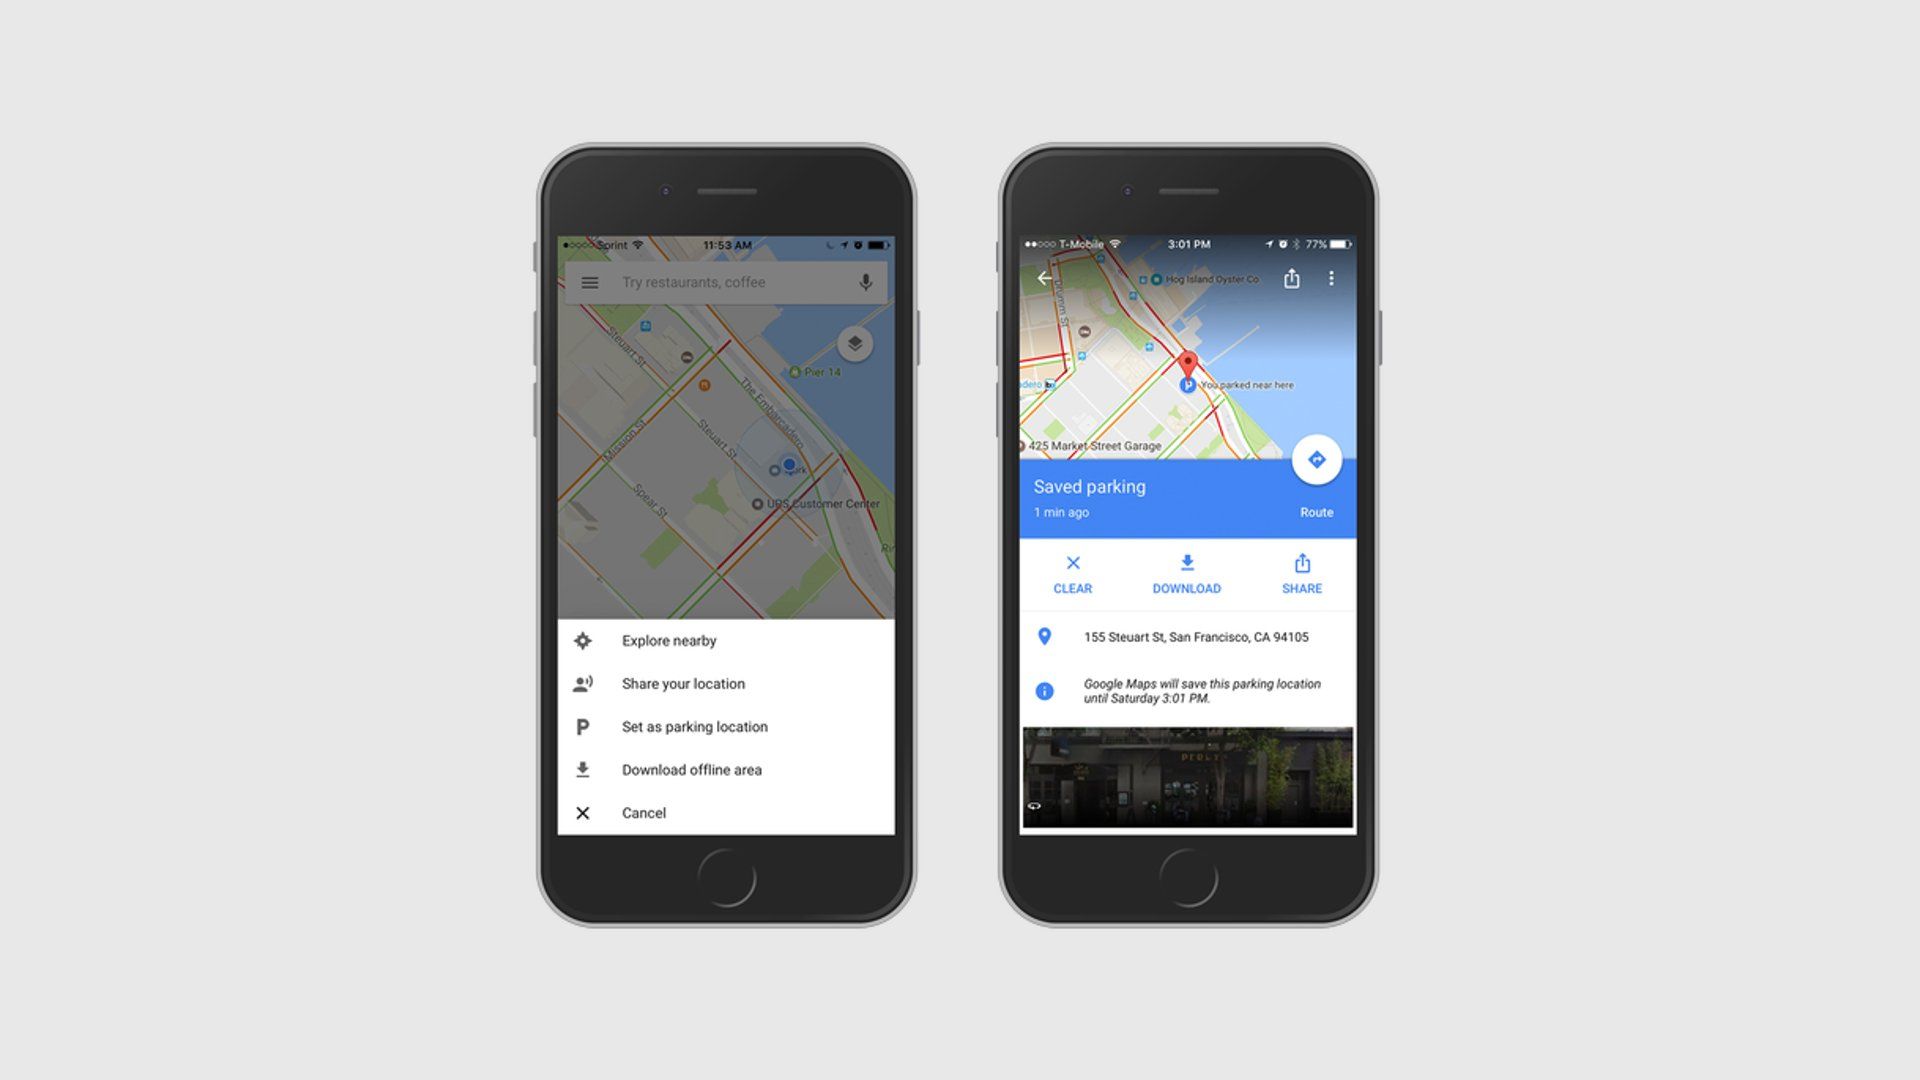 Google Maps For iOS - Parking Feature